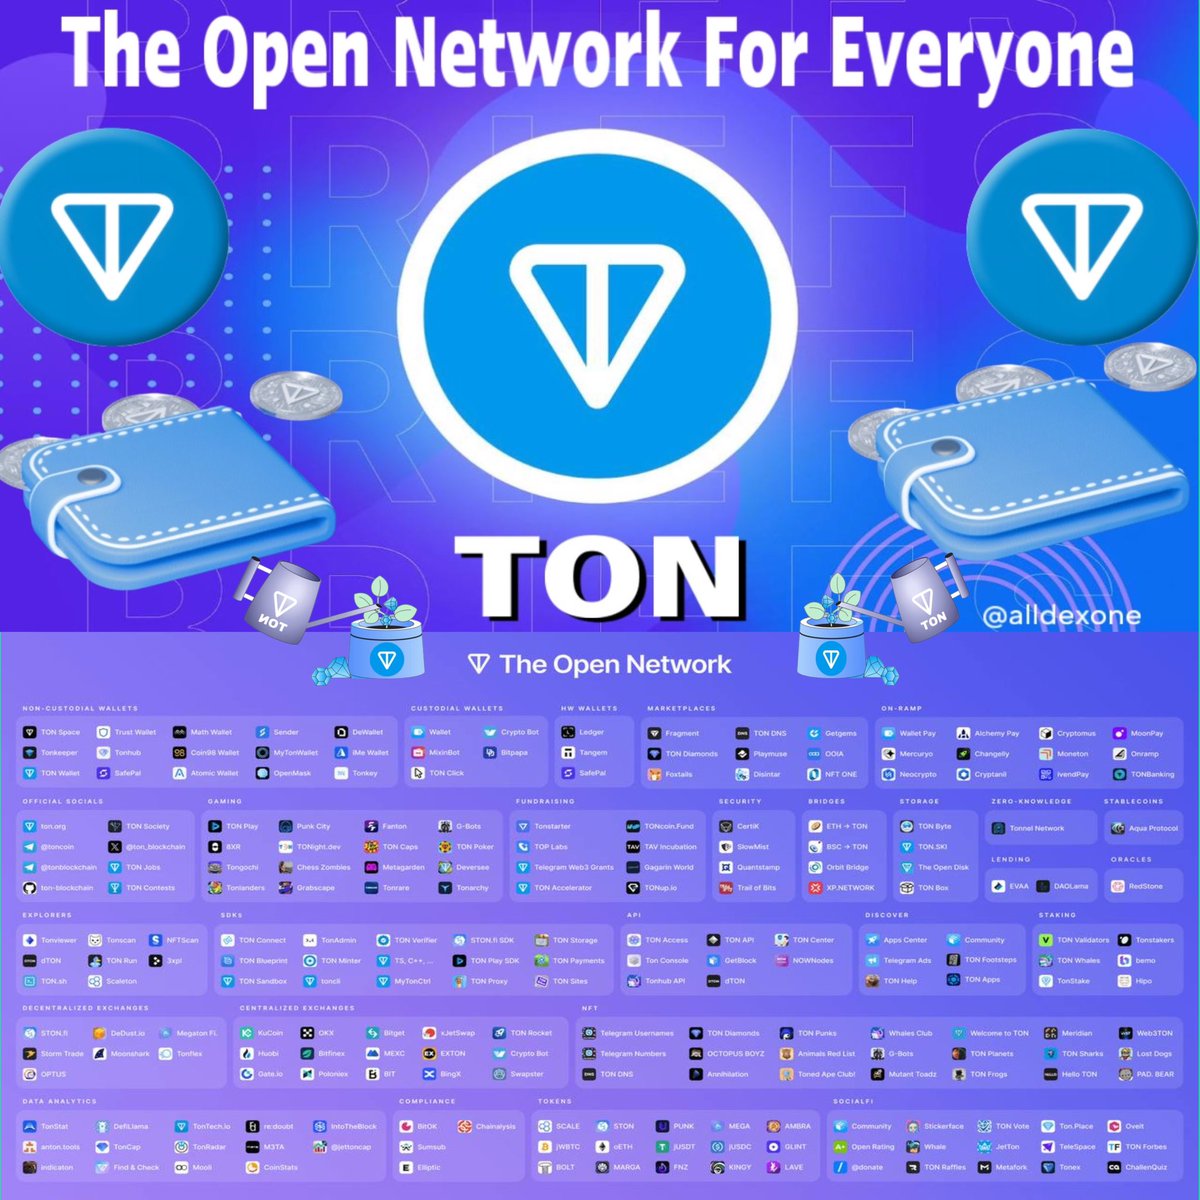 ✴️ Overview of #TON Blockchain's Ecosystem

1. Wallet supporting $TON network:

- @tonkeeper
- @wallet_tg
- @openmask_wallet
- @GemWalletApp
- @wallet_tg
- mytonwallet.io

2. CEXs that support $TON blockchain:

- $TON and some tokens above $TON are listed on #OKX,